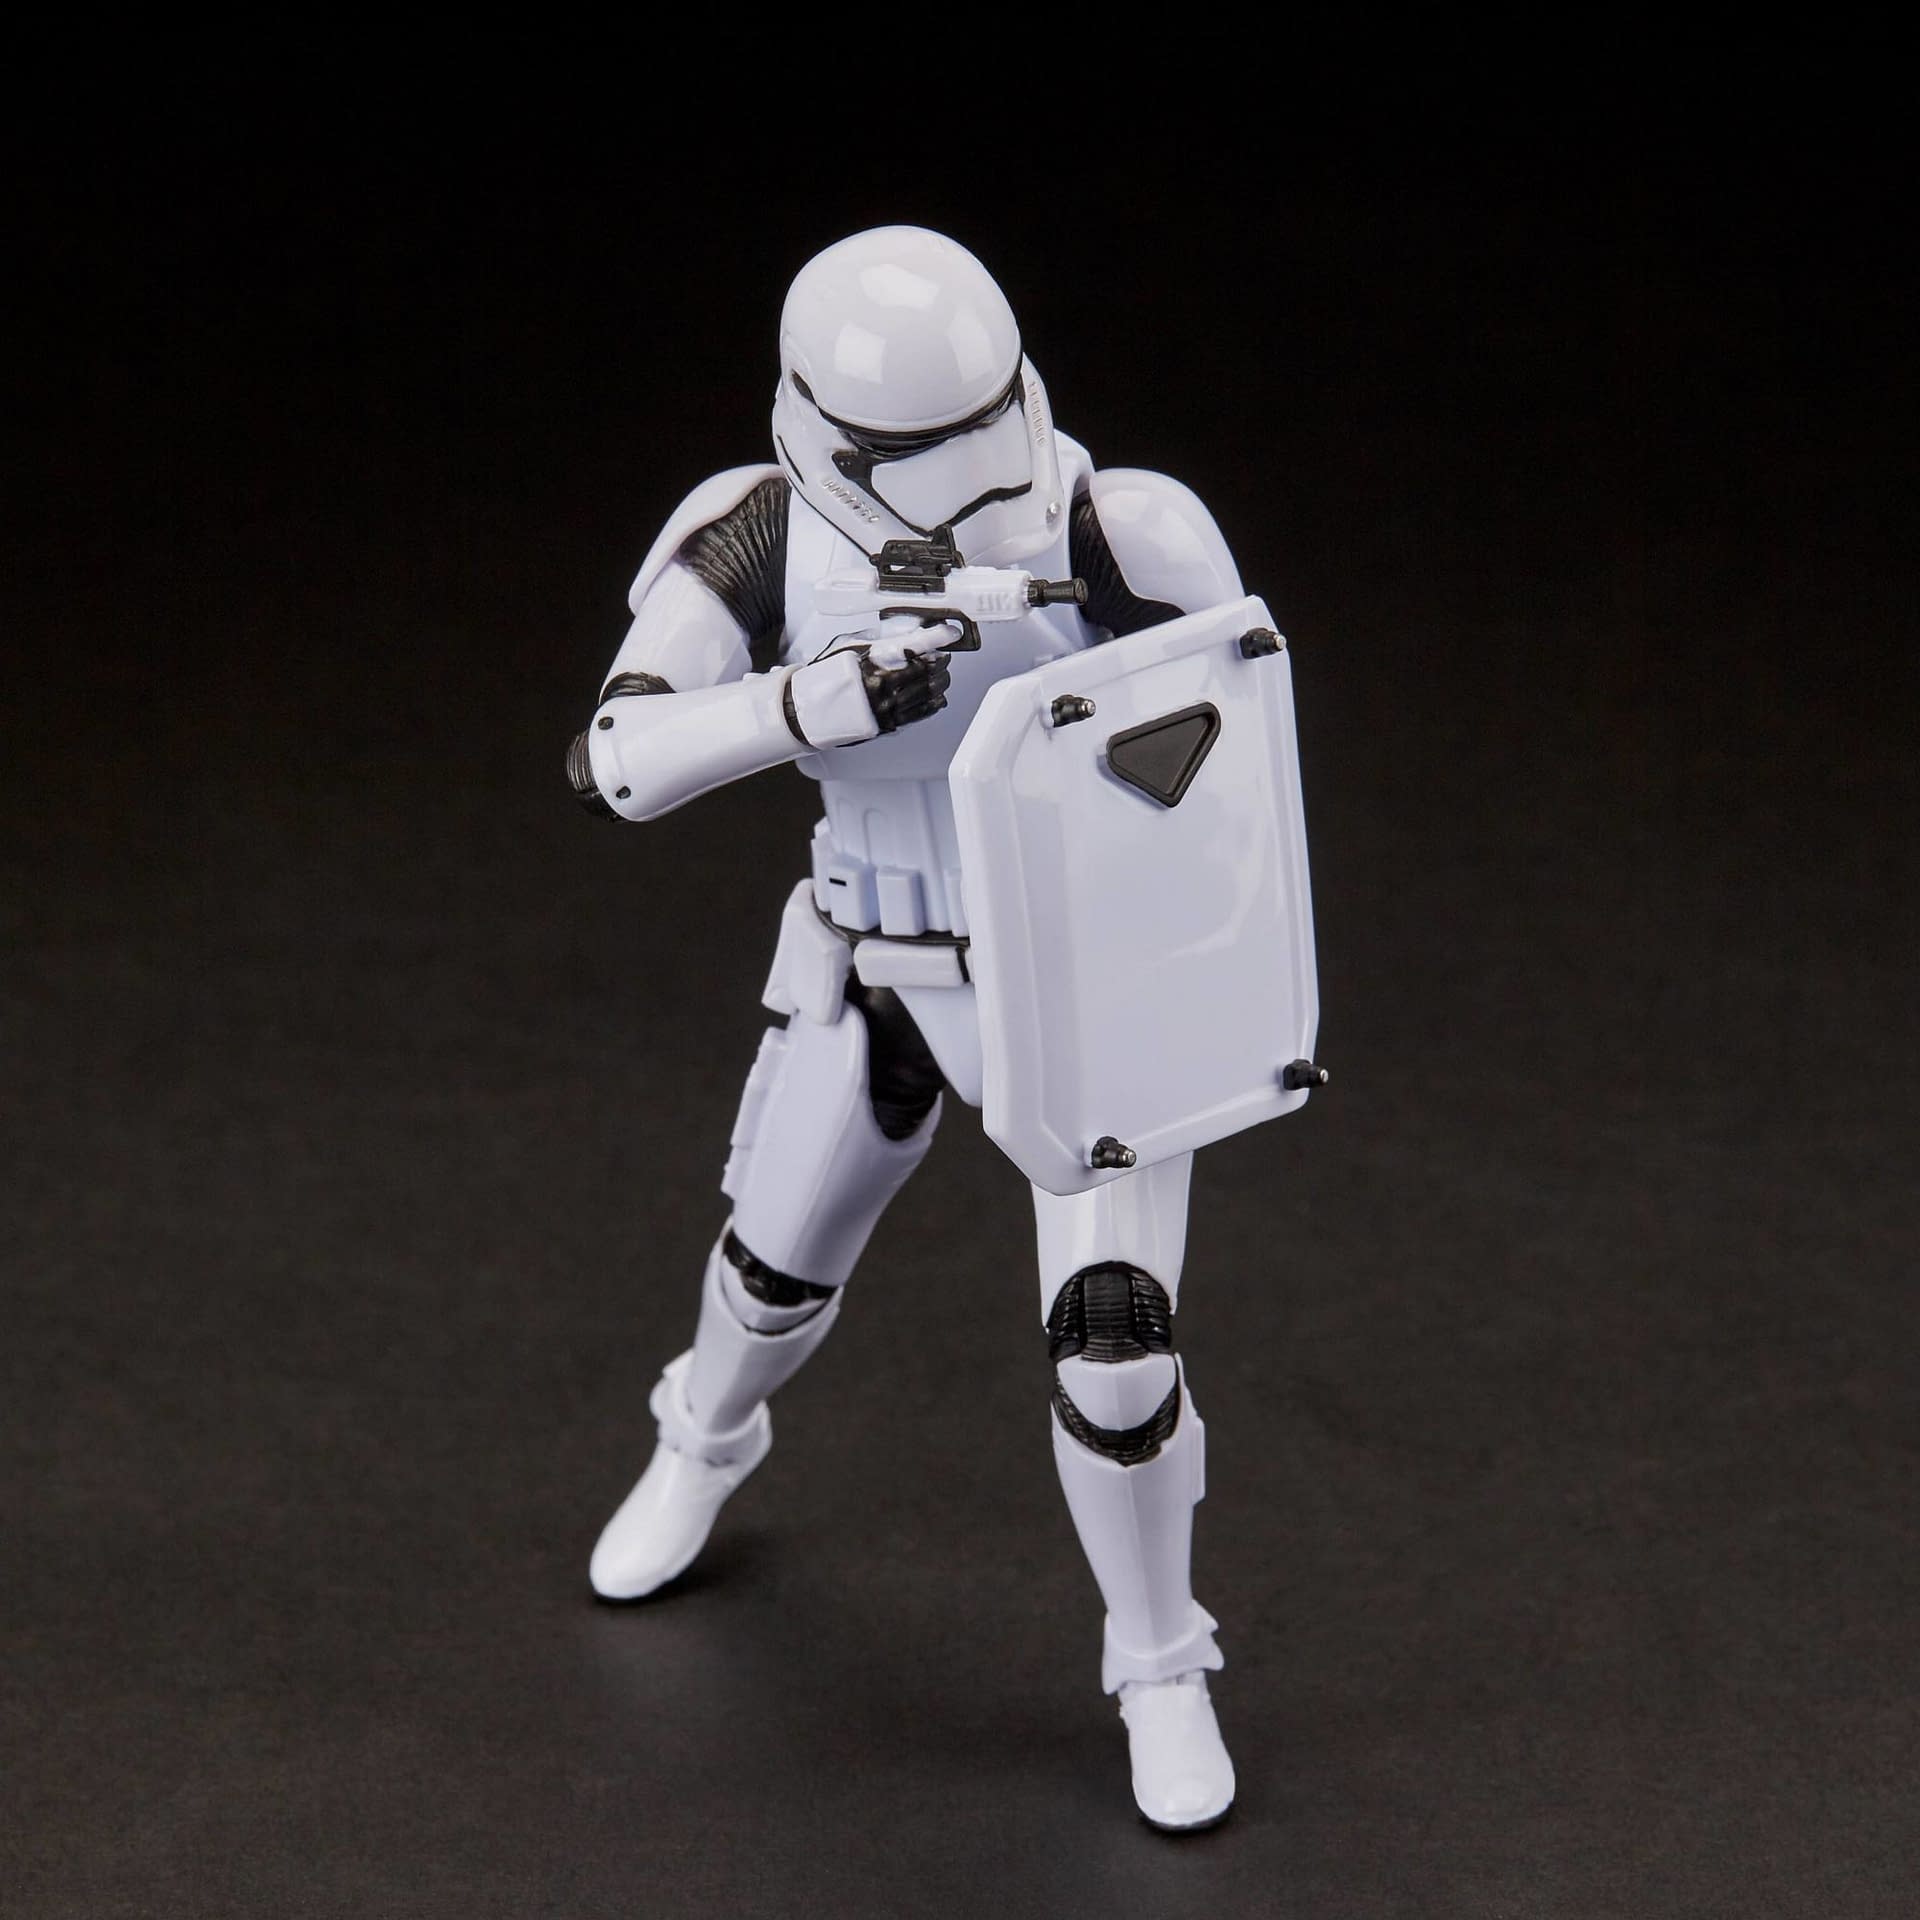 New Stormtroopers Join The Ranks for Triple Force Friday 